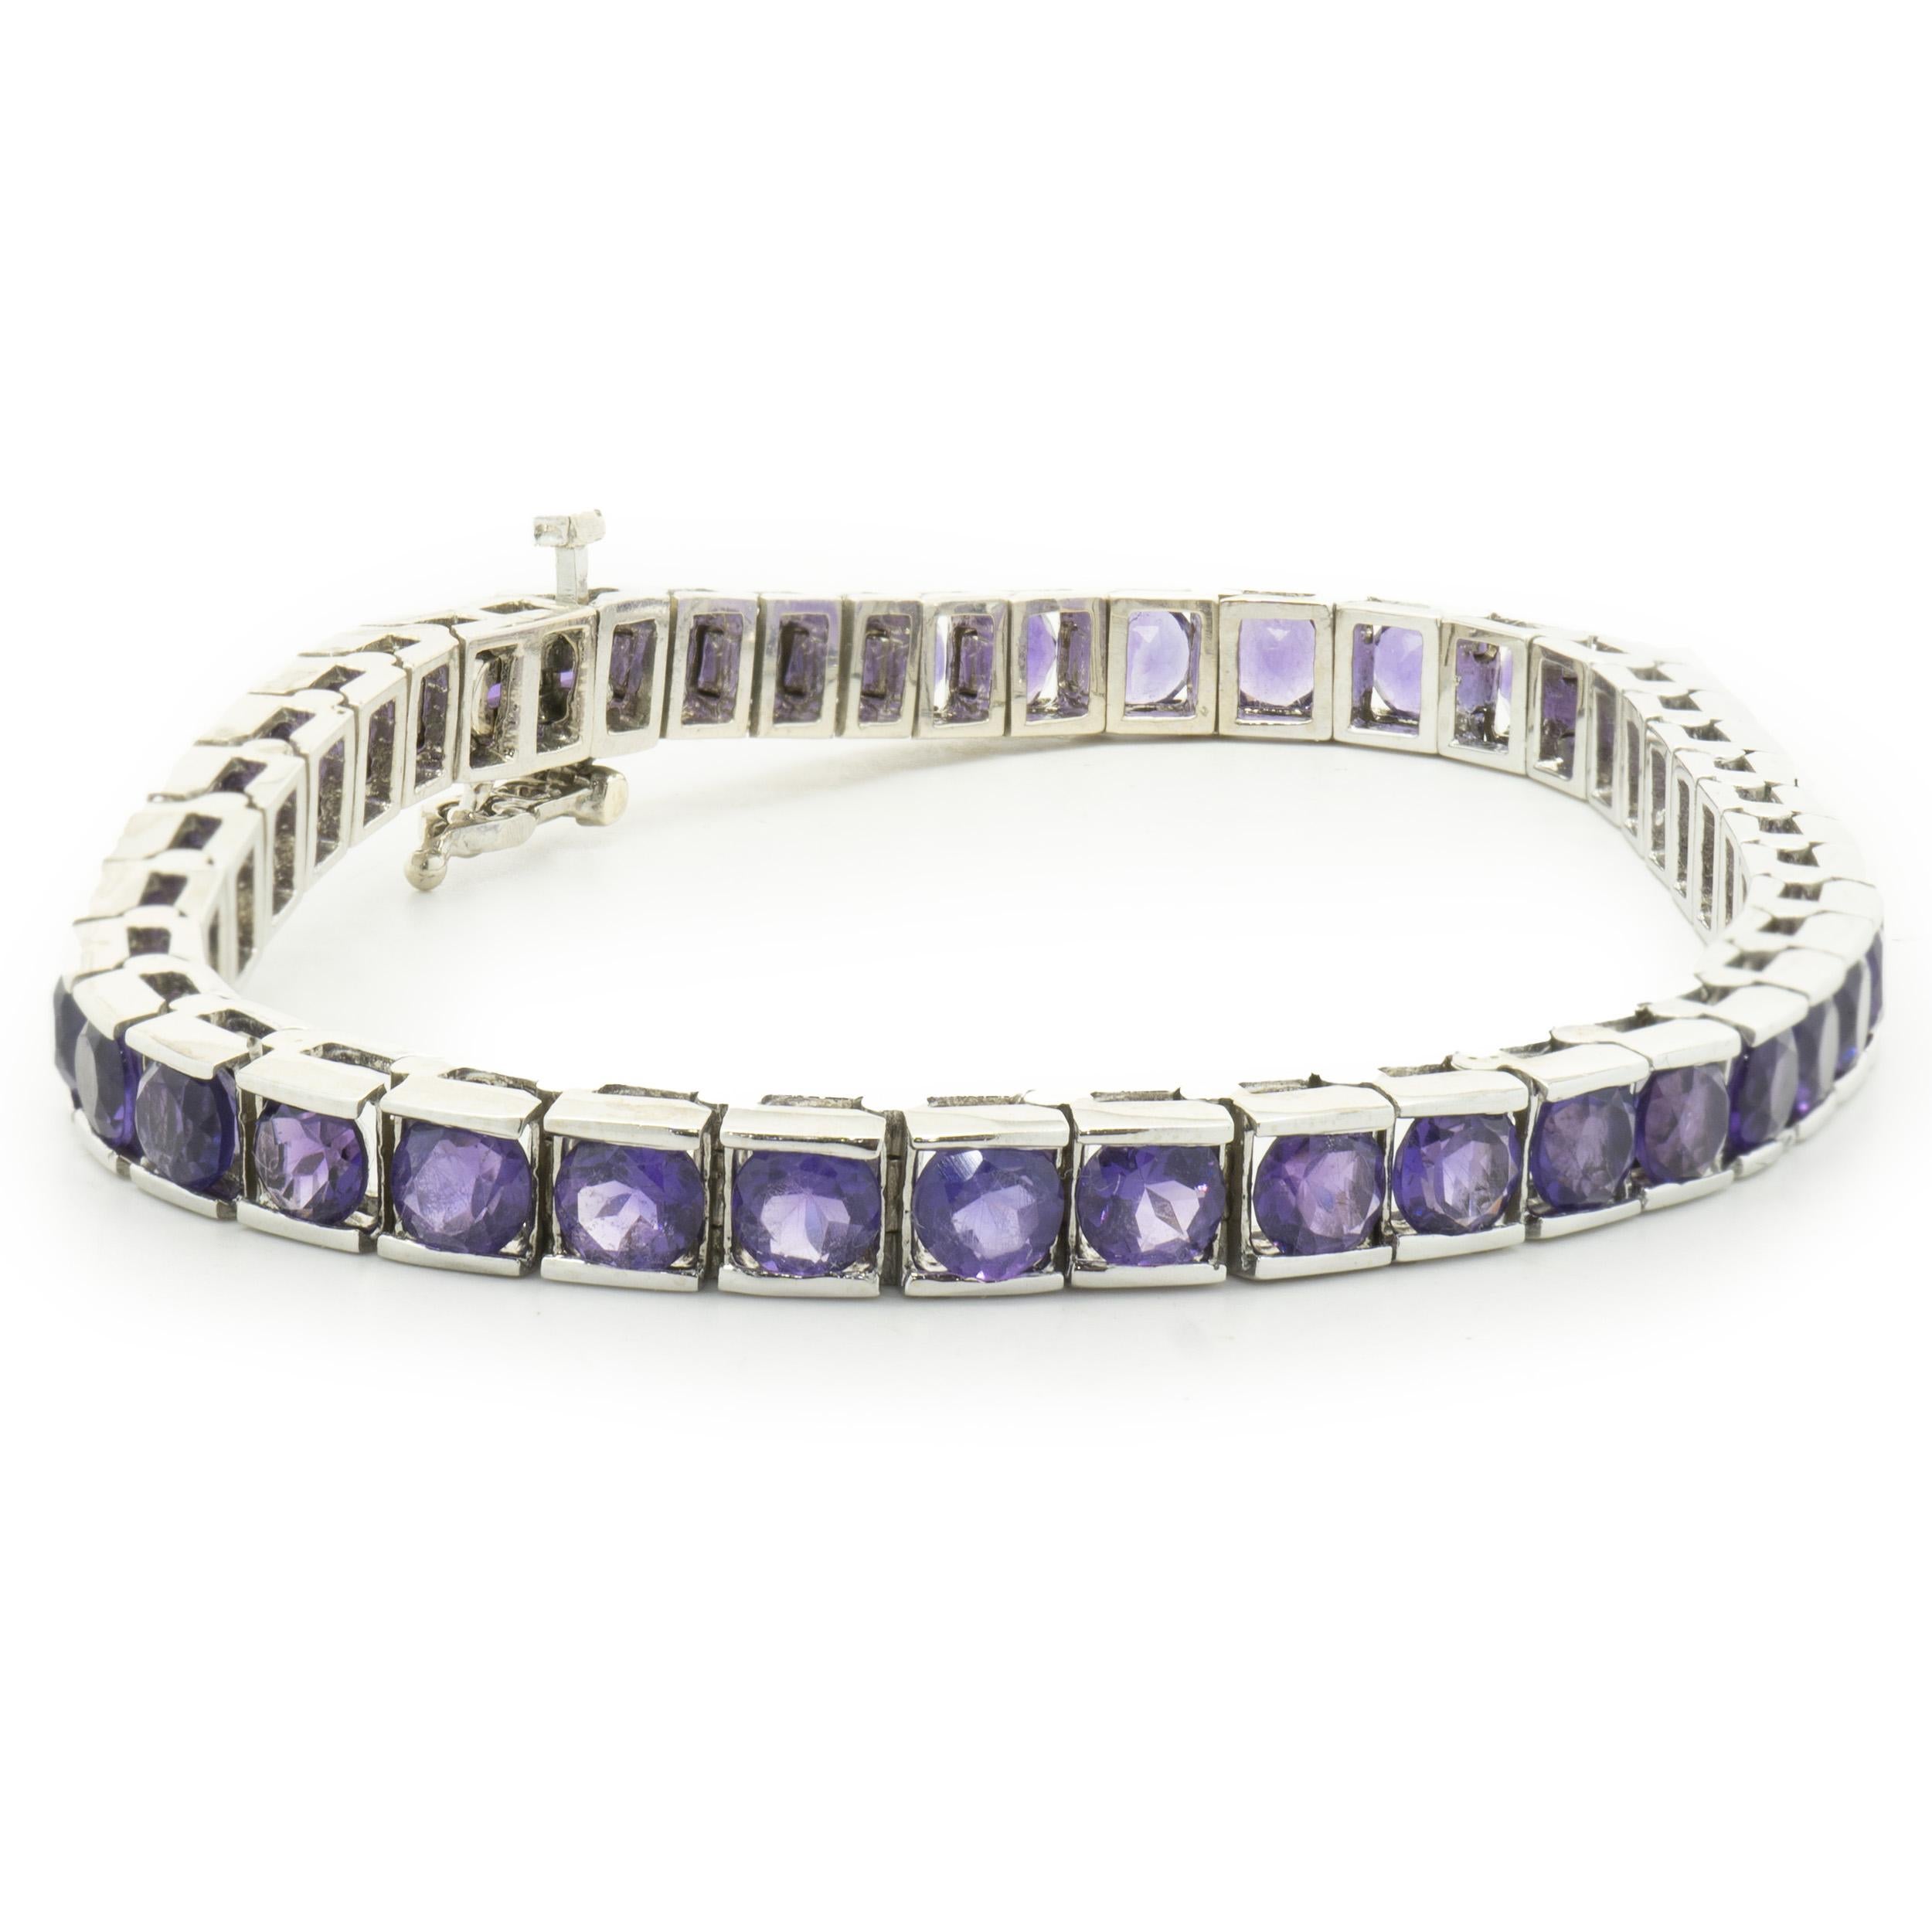 Designer: custom
Material: 14K white gold
Amethyst: 43 princess cut = 6.45cttw
Weight: 17.00 grams
Dimensions: bracelet will fit up to a 7-inch wrist
